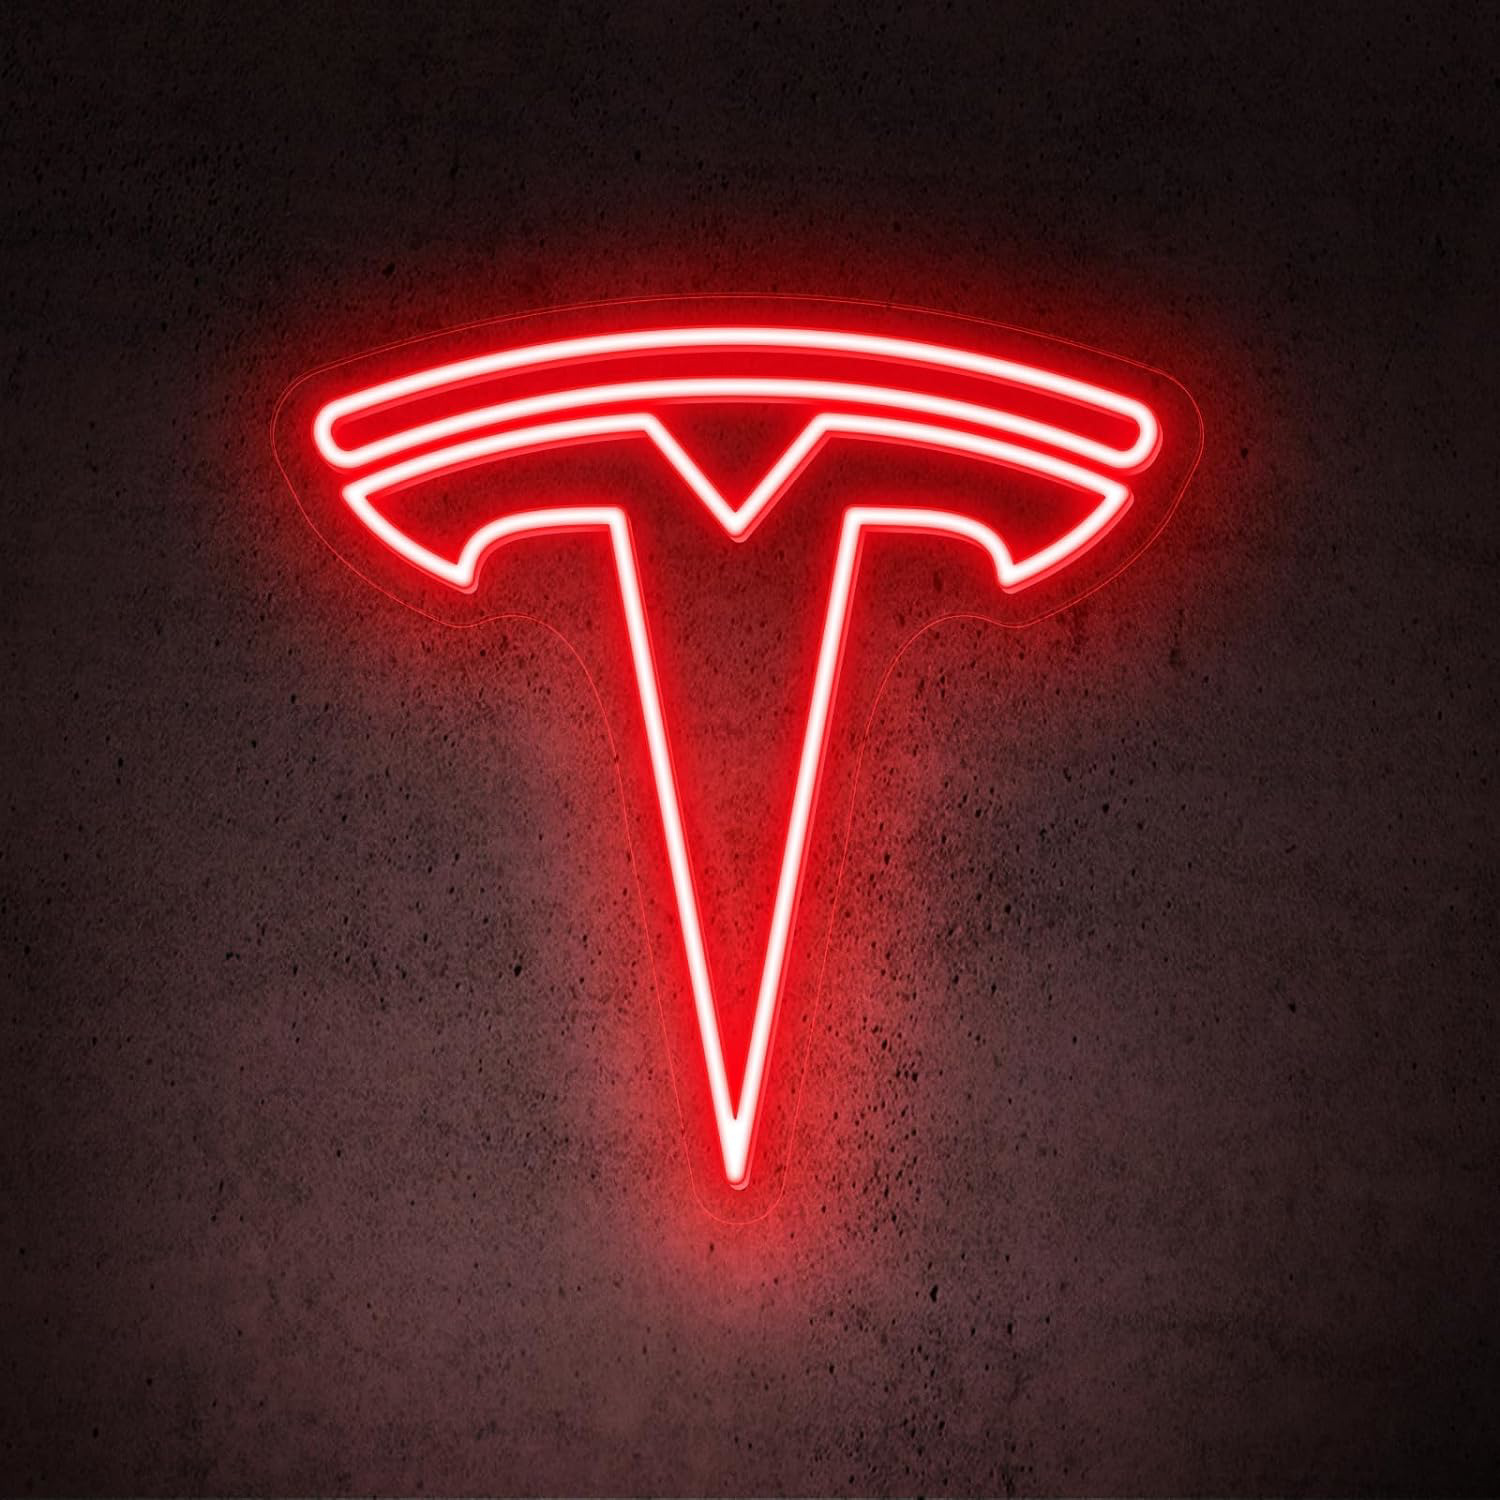 Neonogo Tesla Car Led Neon Sign Red 13.5 x 13 Inches Car Led Neon Sign Diammable